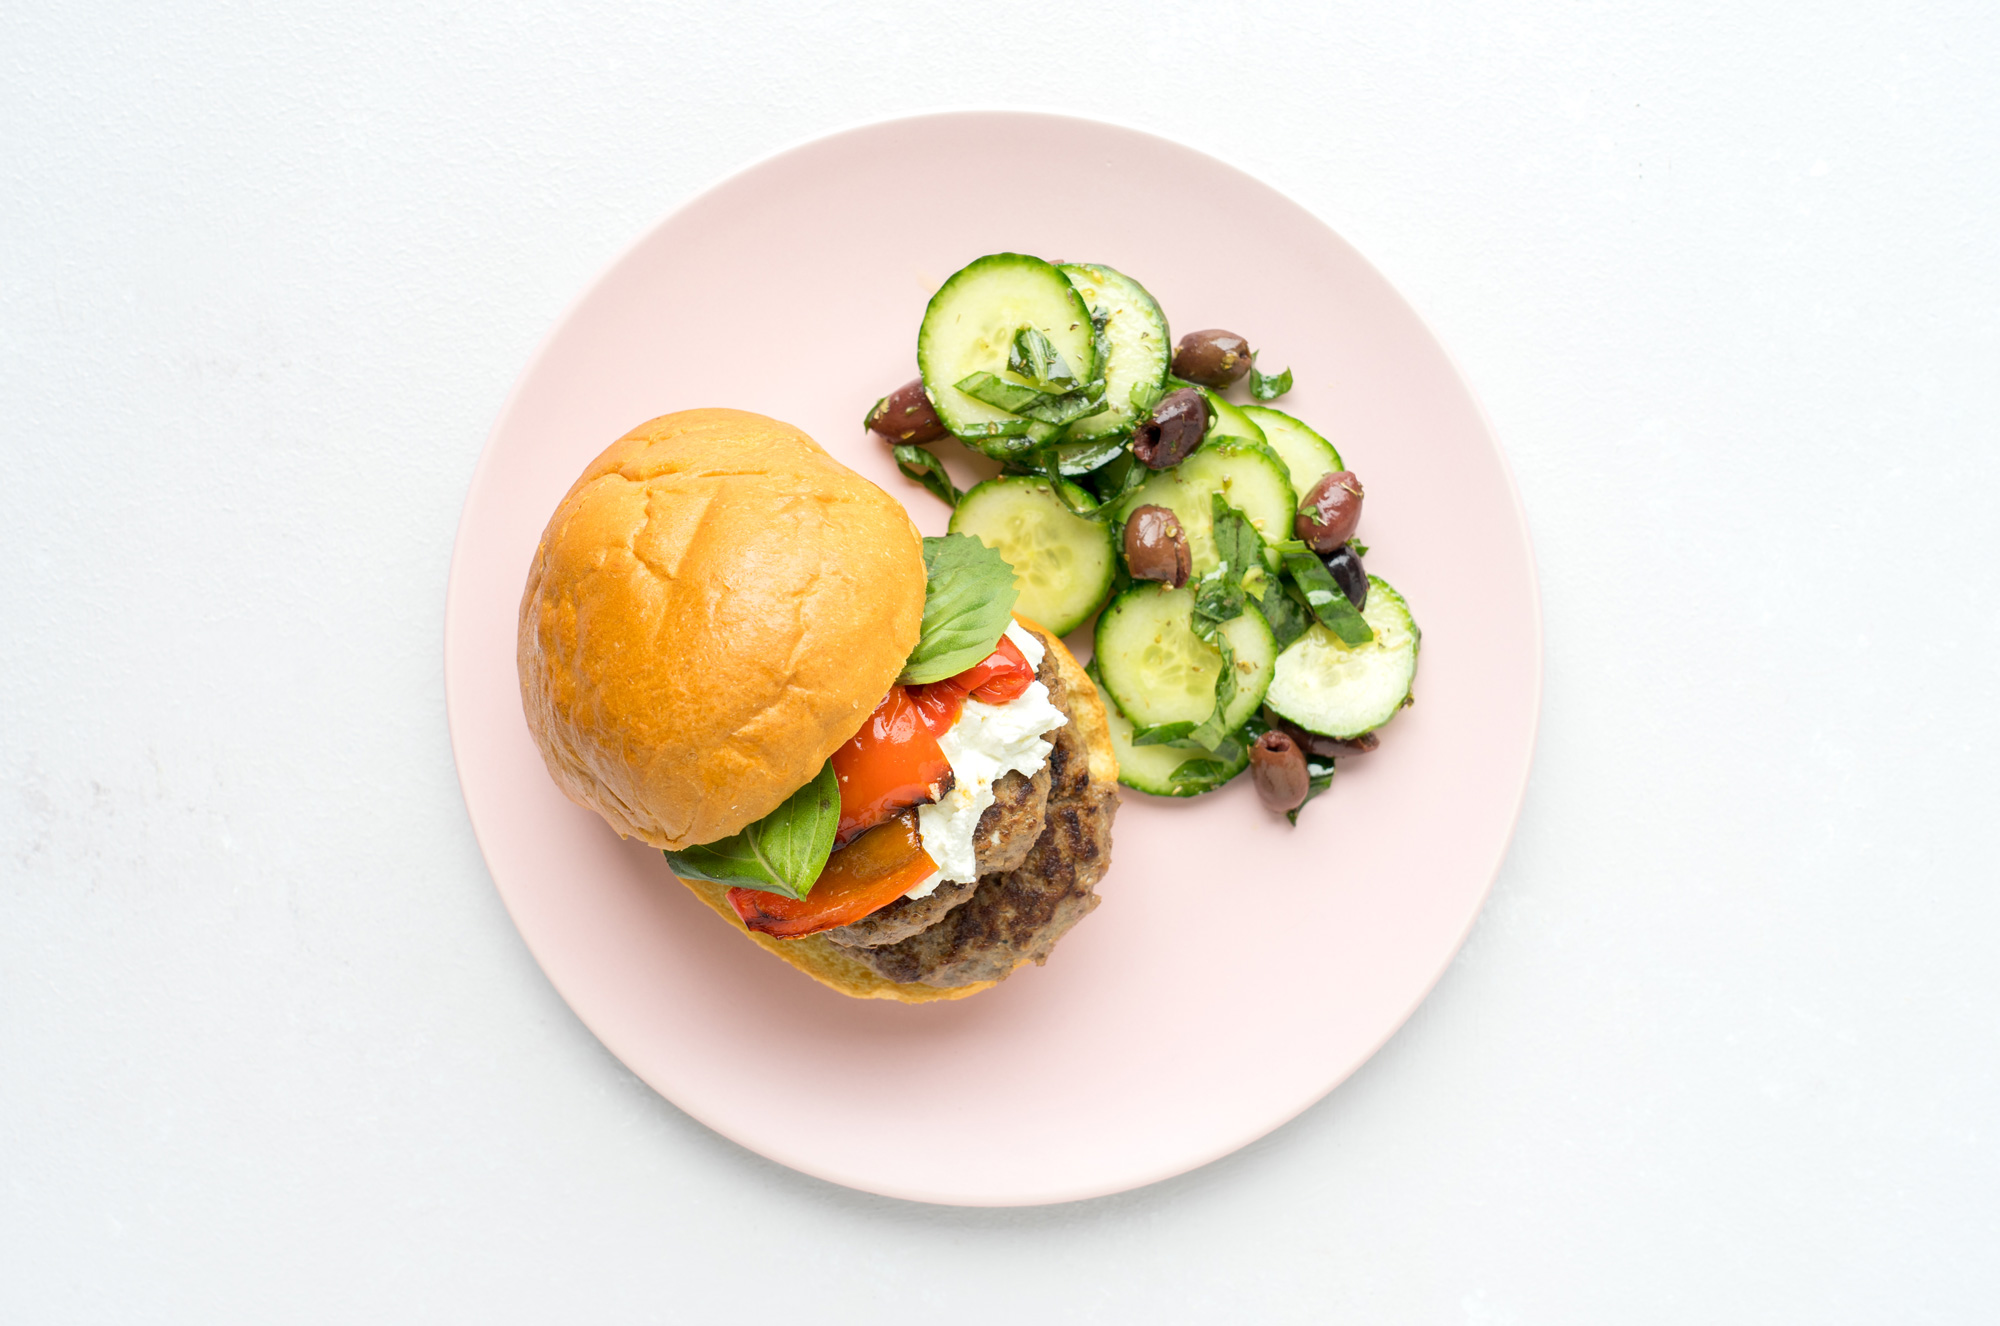 Lamb Burgers with Feta Sauce, Roasted Peppers, Cucumber Salad